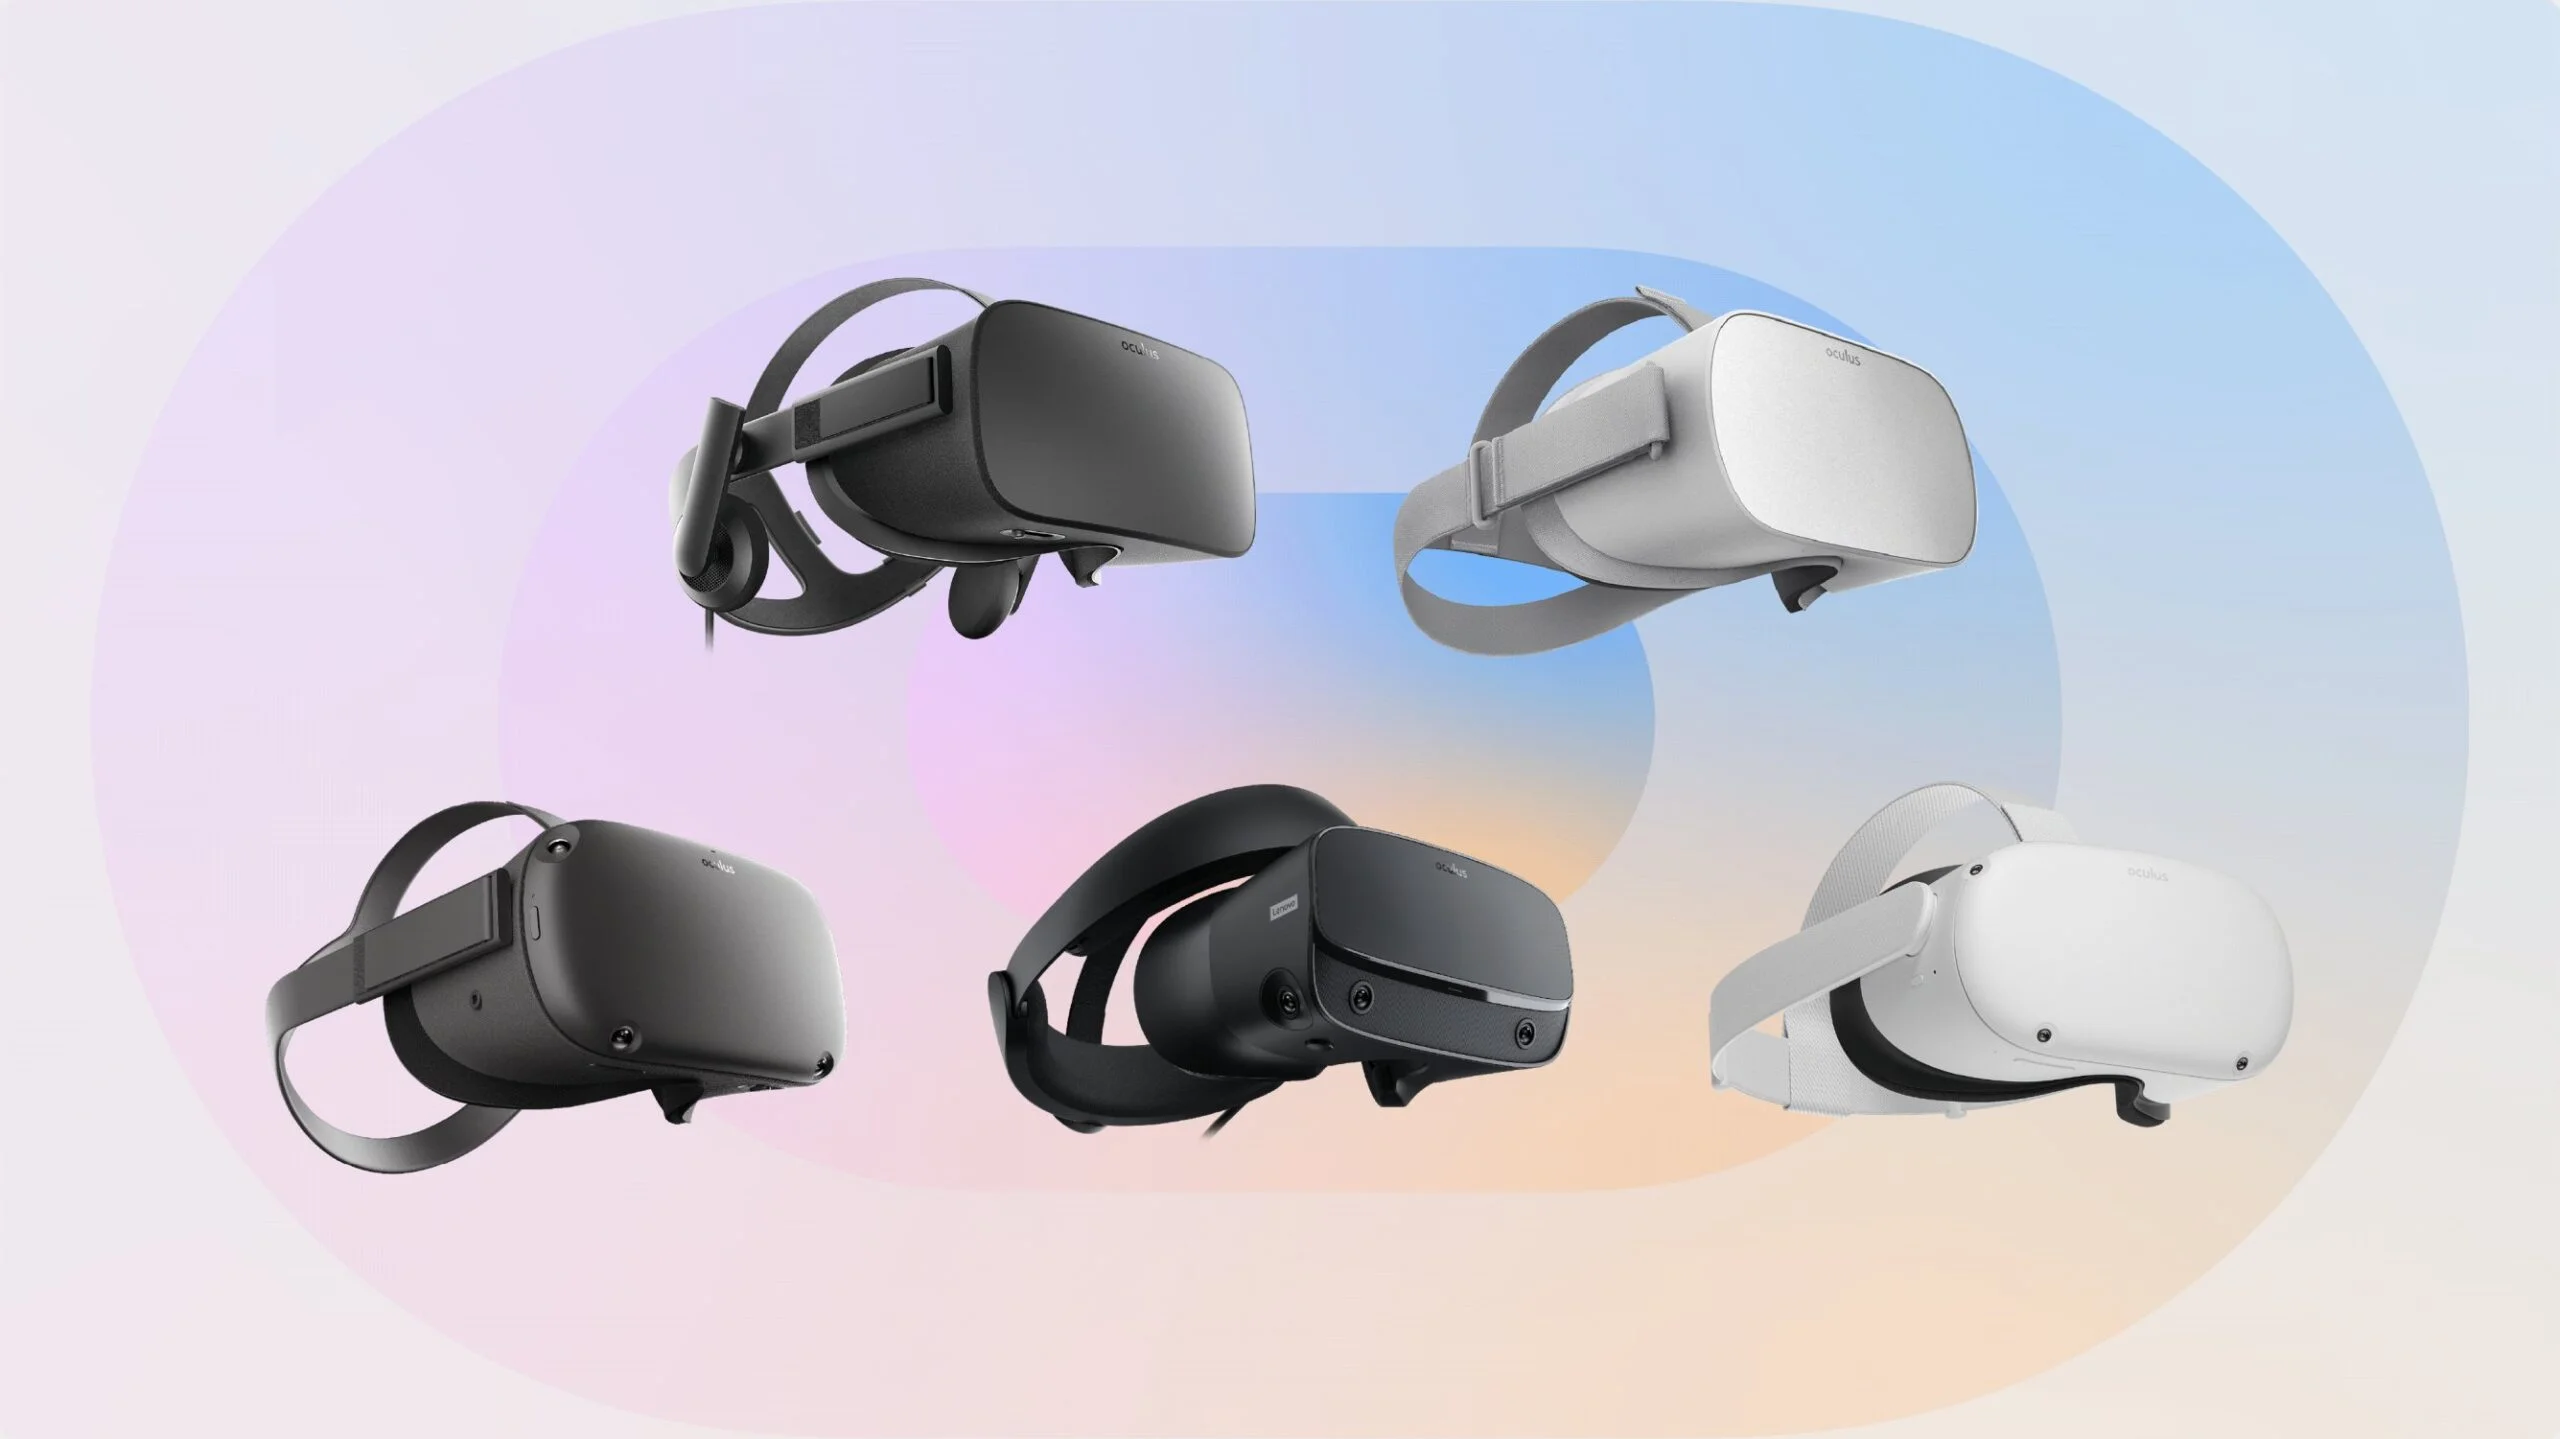 Meta’s New VR Devices Could Help Push Platform Into The Mainstream